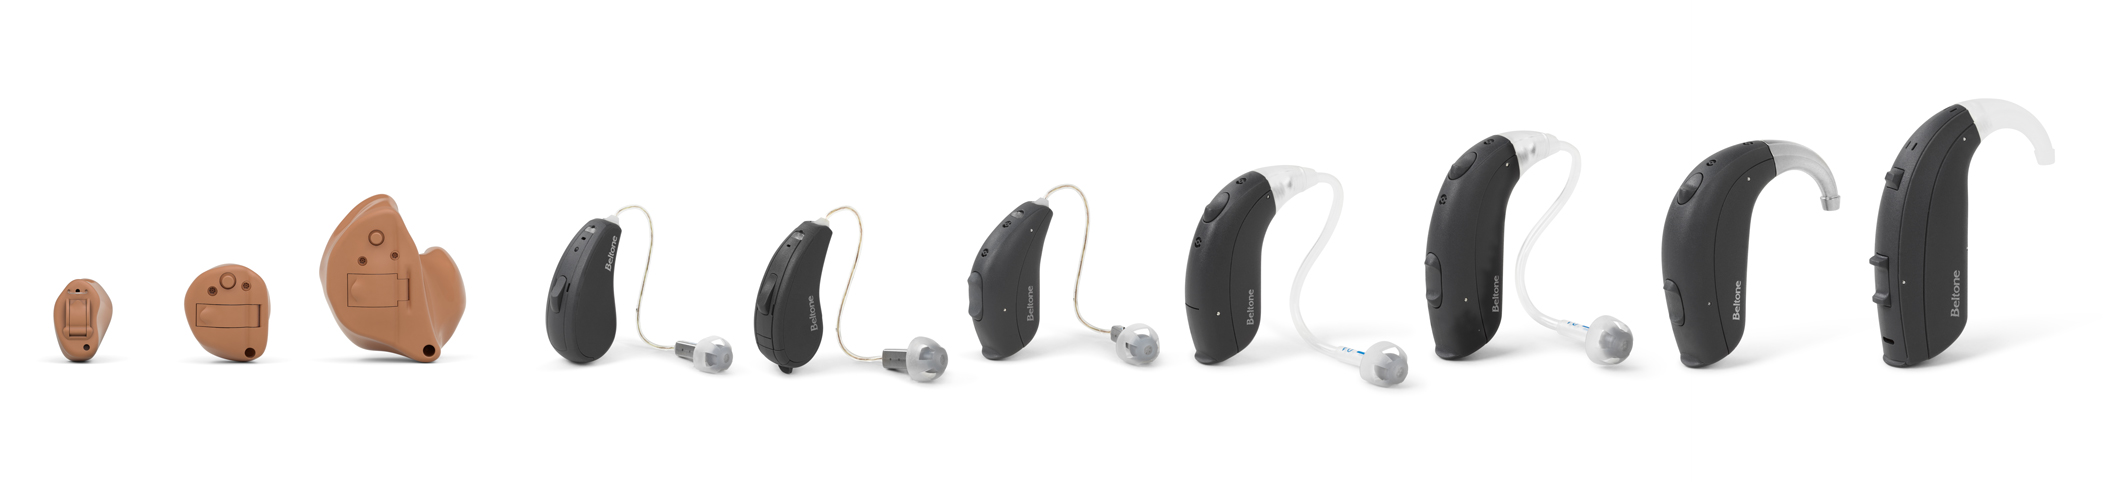 Beltone Rely Hearing Aids Product Line Up and Colors